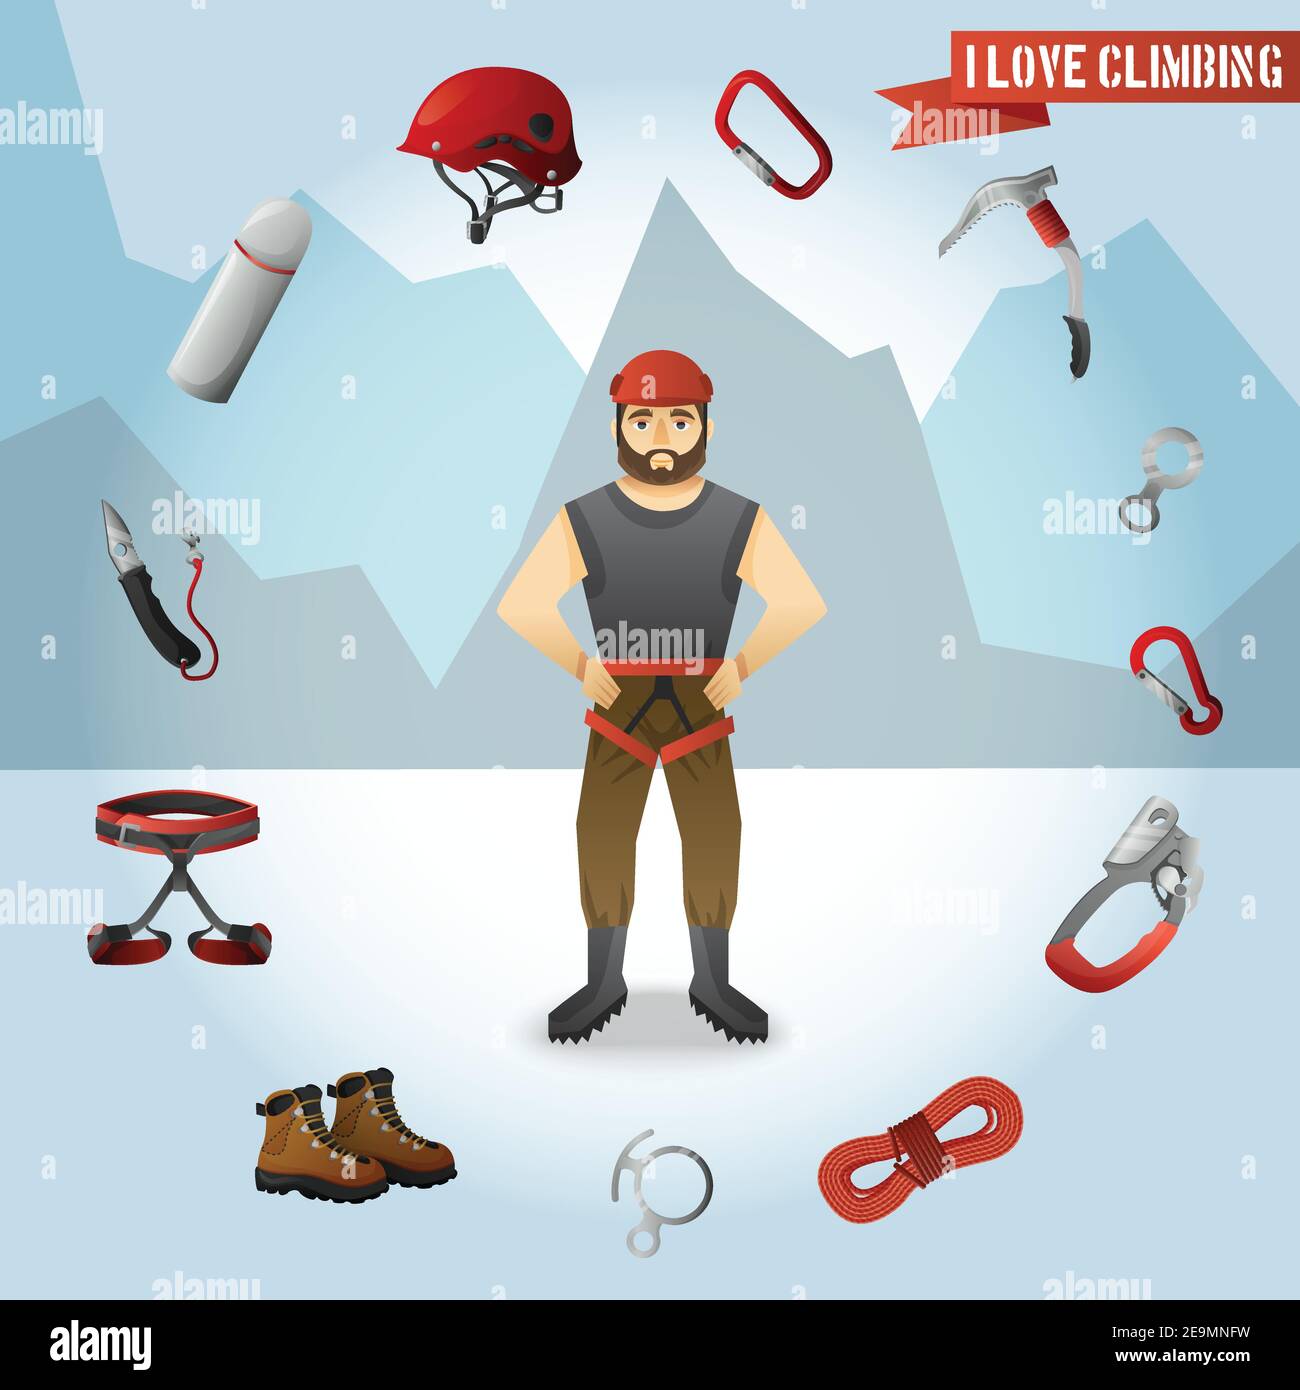 Mountain climber cartoon character with alpinist tools and accessories circle against mountains background poster absrtact vector illustration Stock Vector